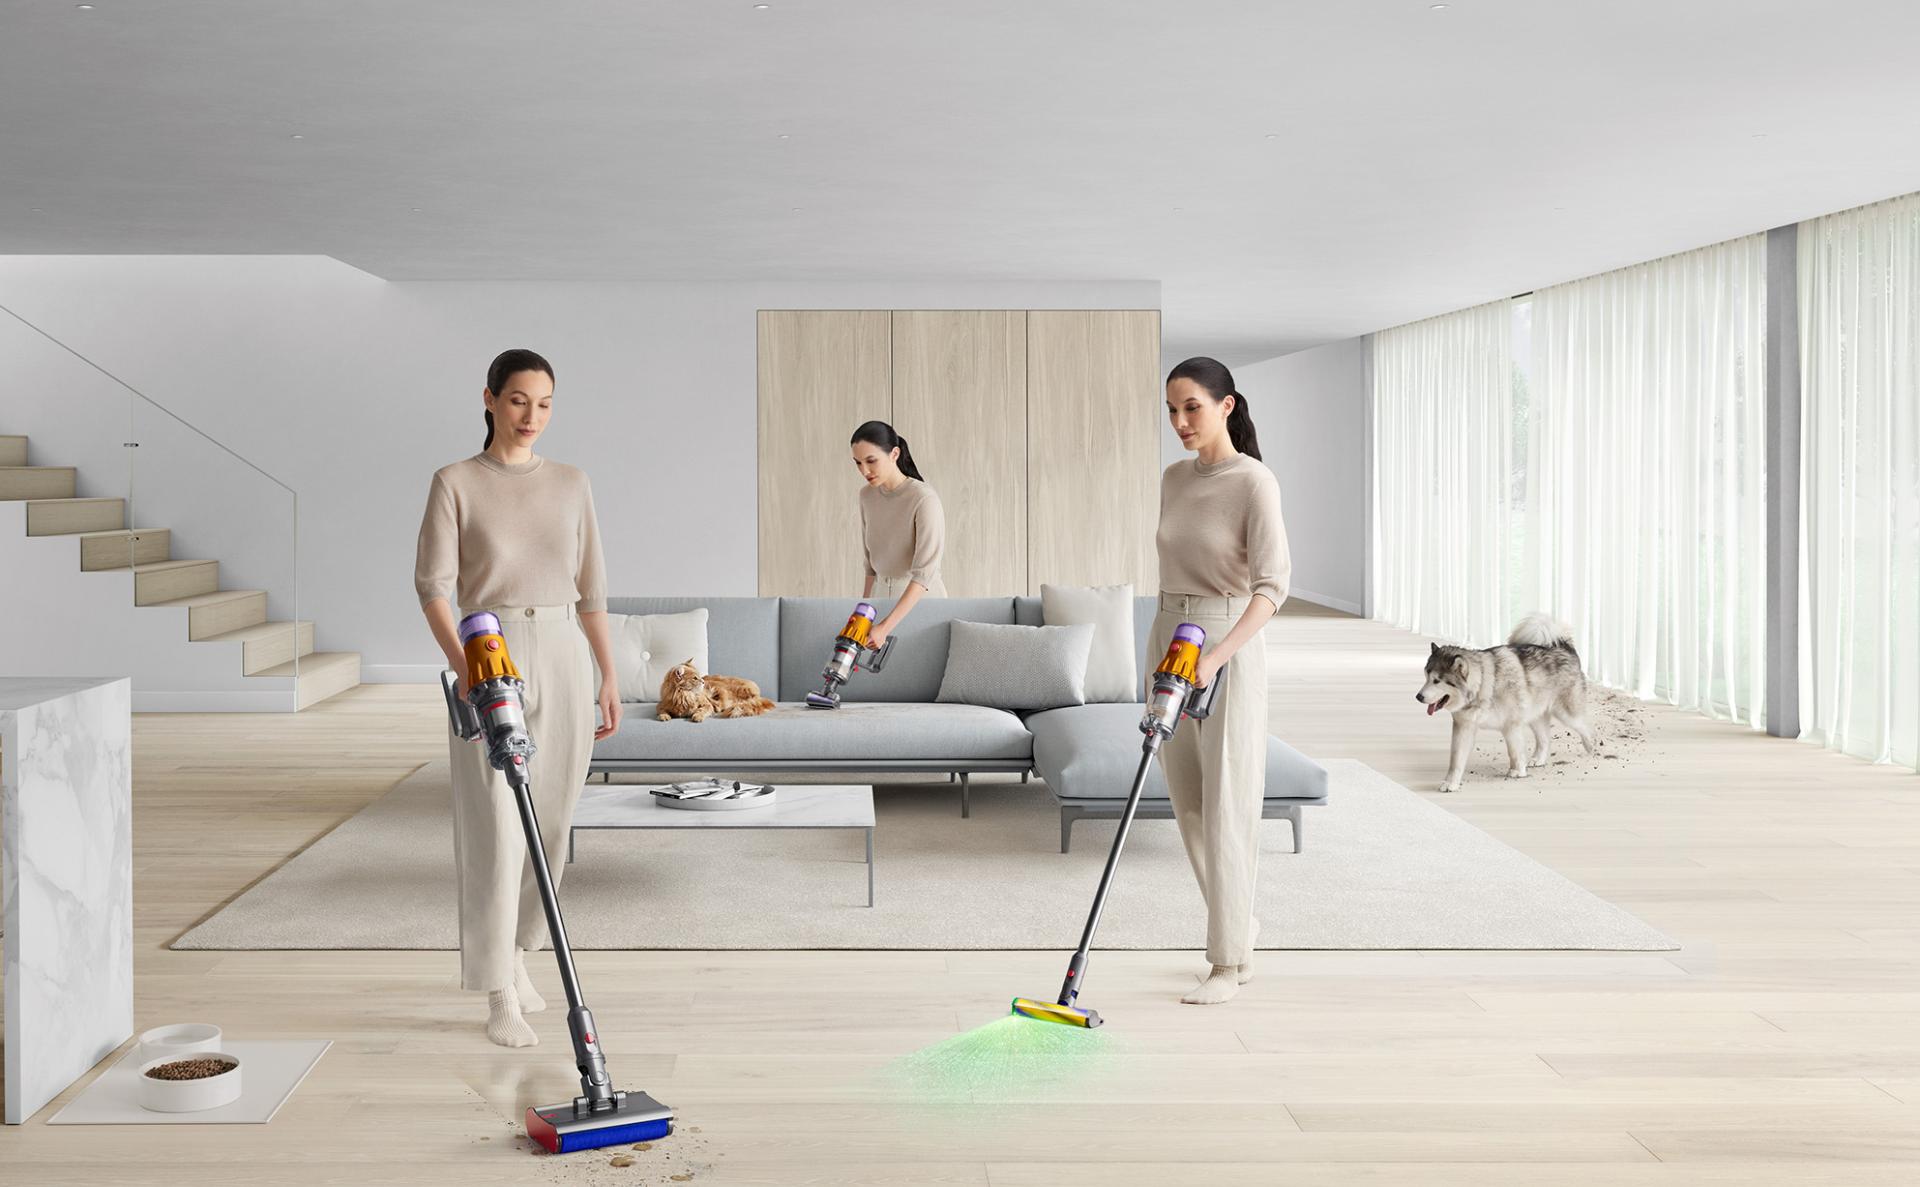 Dyson V12s vacuum in action